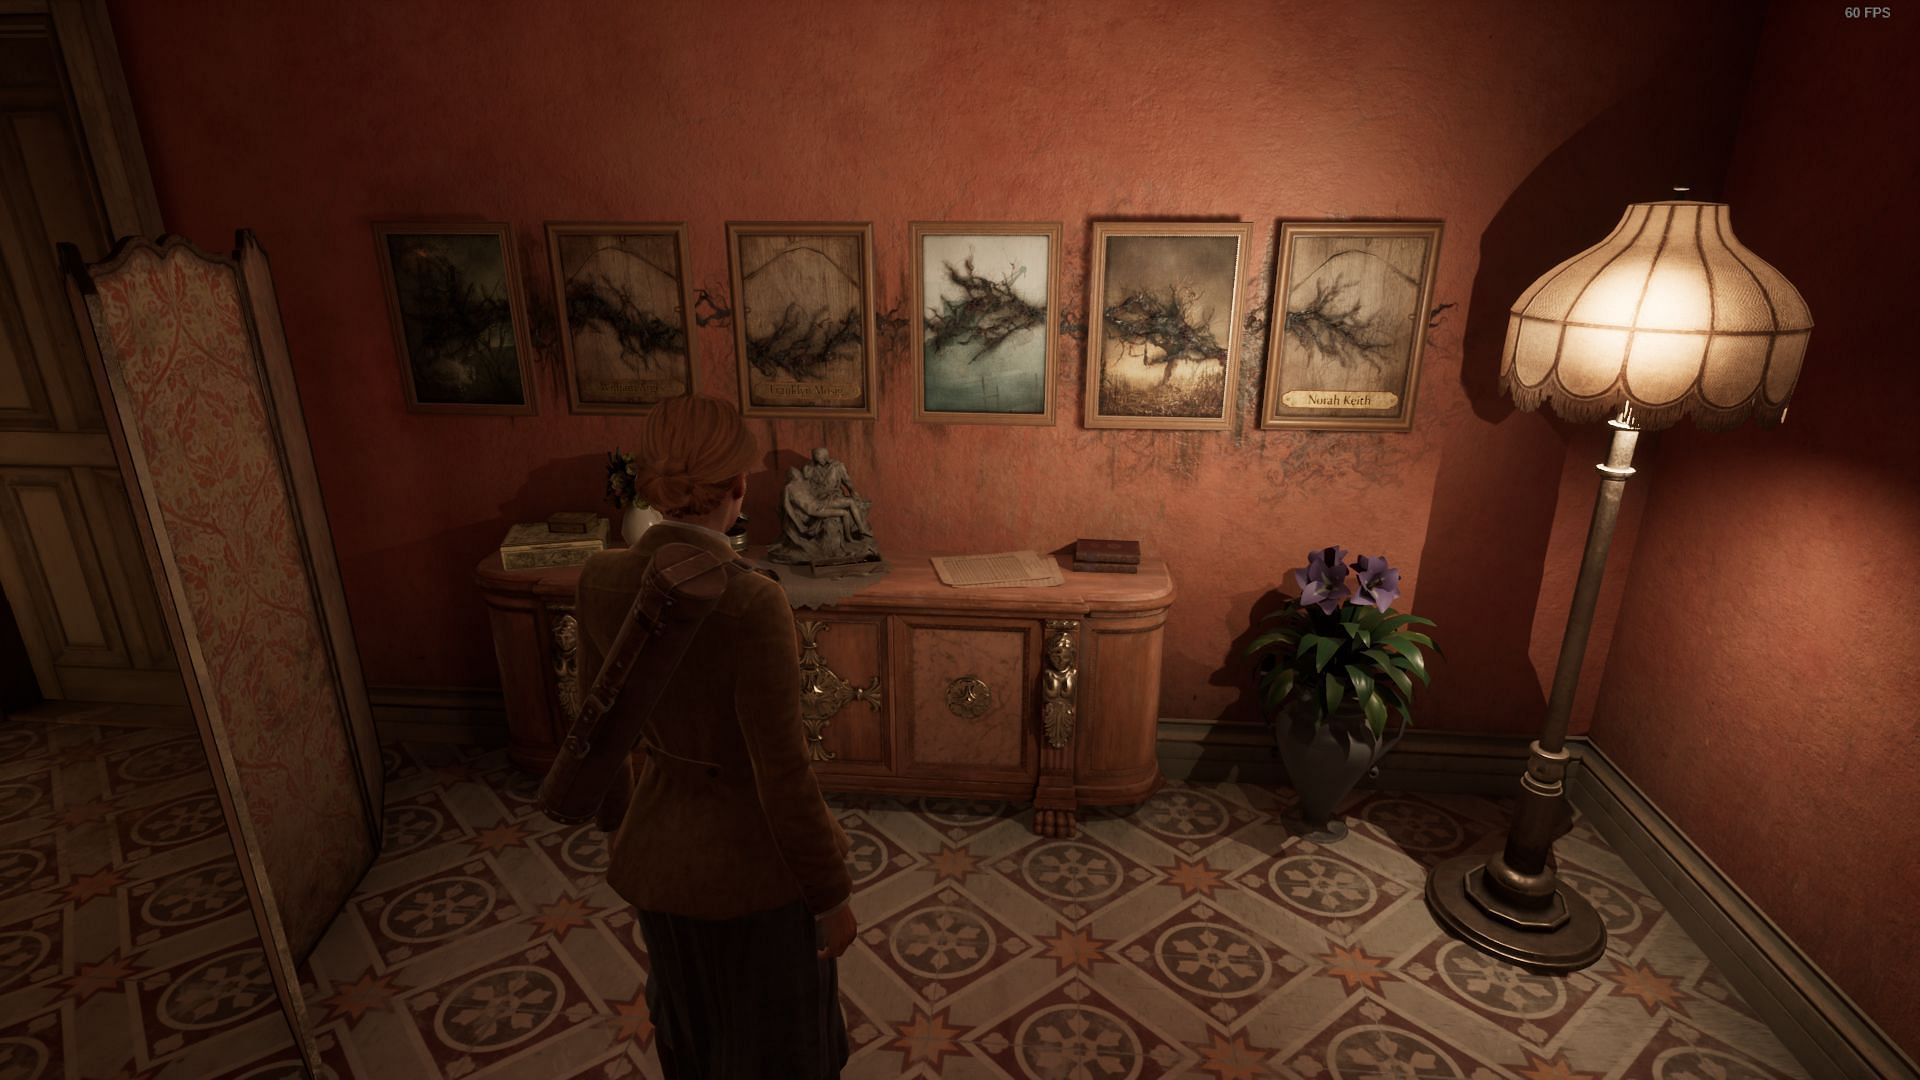 Solution for the painting rot puzzle in Alone in the Dark (Image via THQ Nordic)